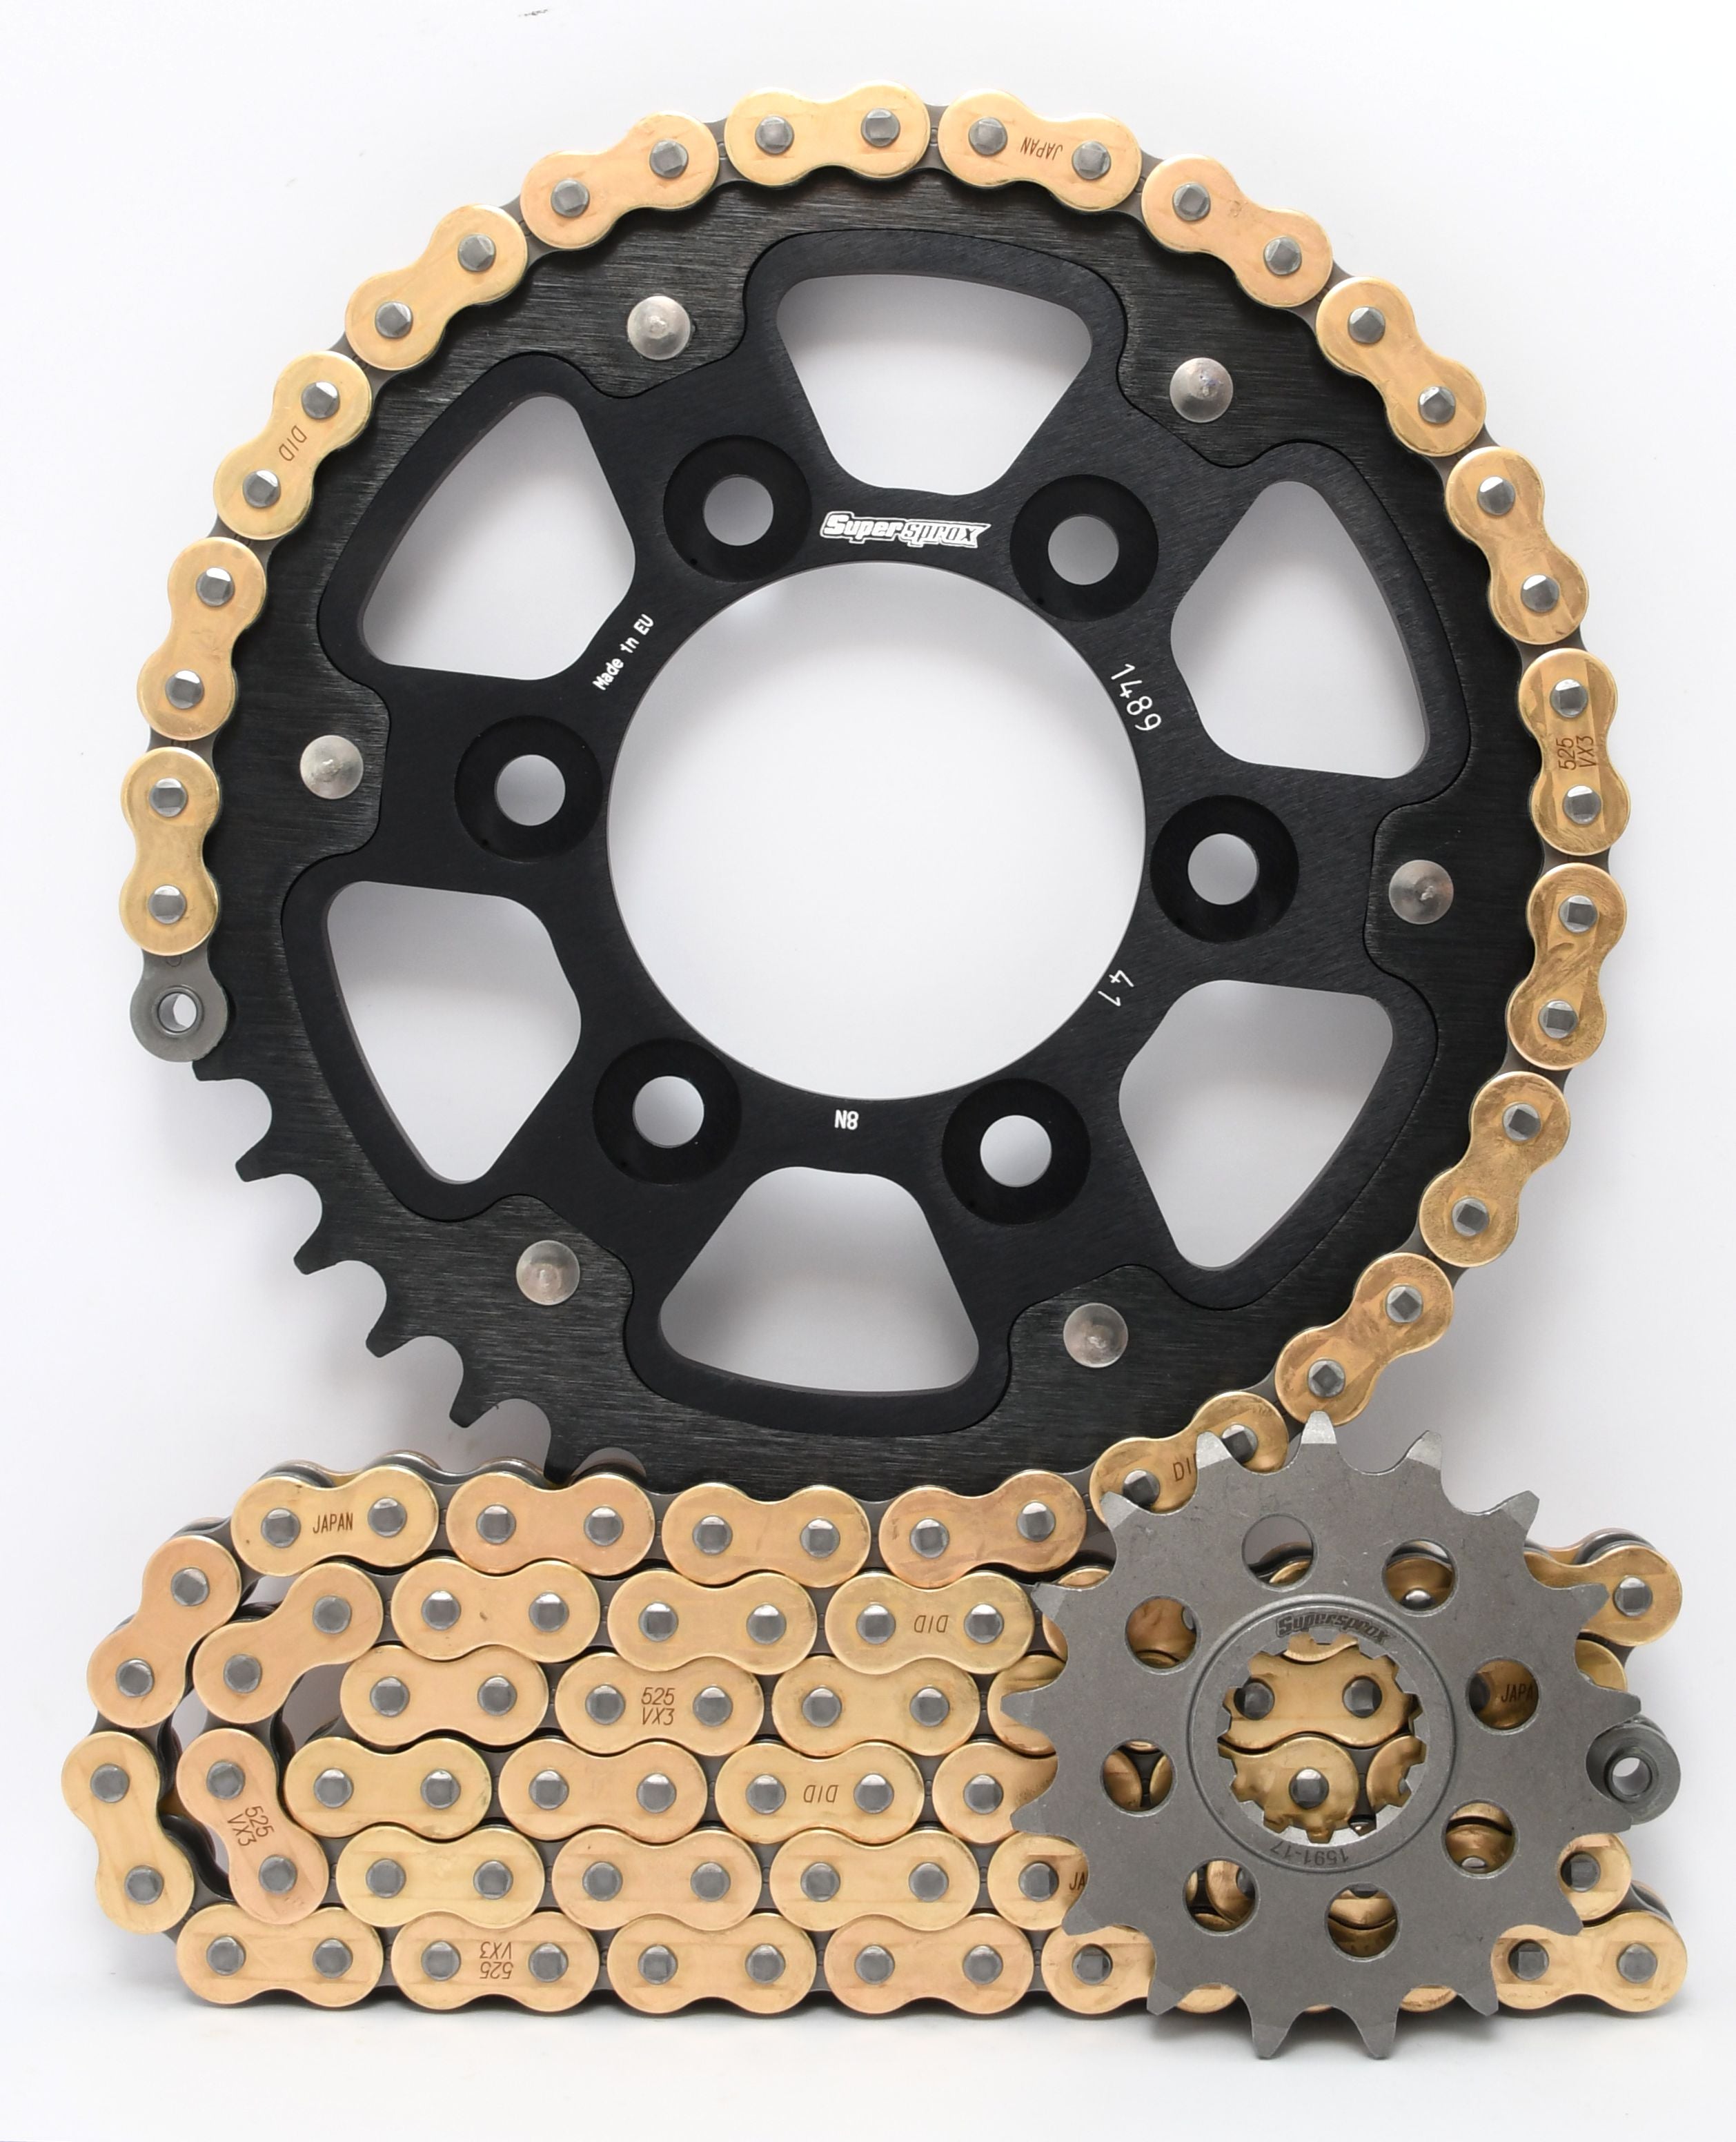 Supersprox Chain & Sprocket Kit for Kawasaki Z900RS 2018> - Standard Gearing